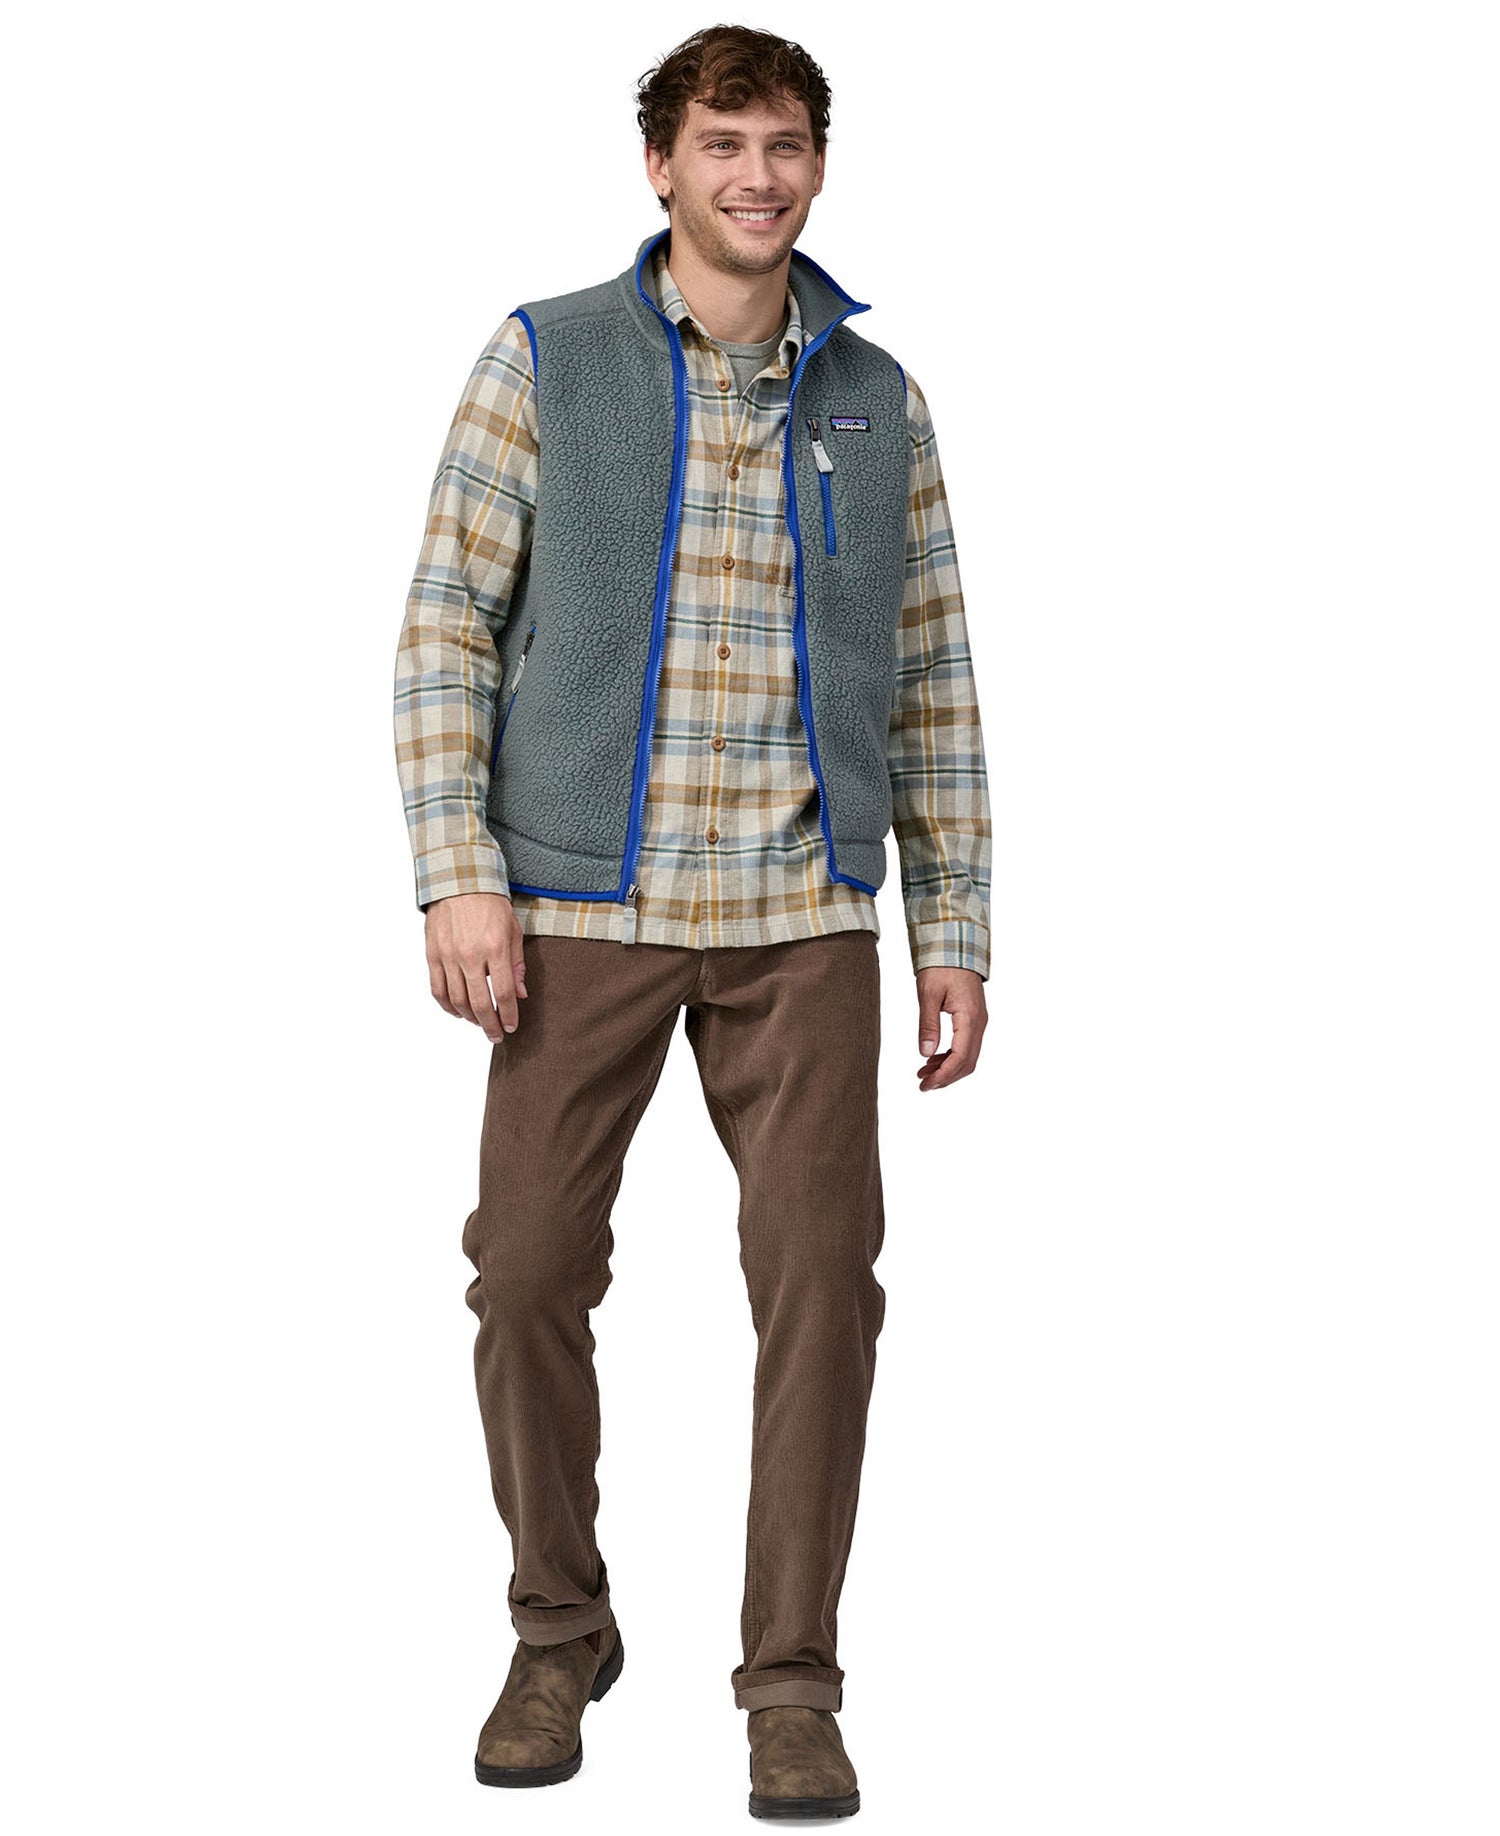 Midweight Fjord Flannel Shirt - Fields: Natural